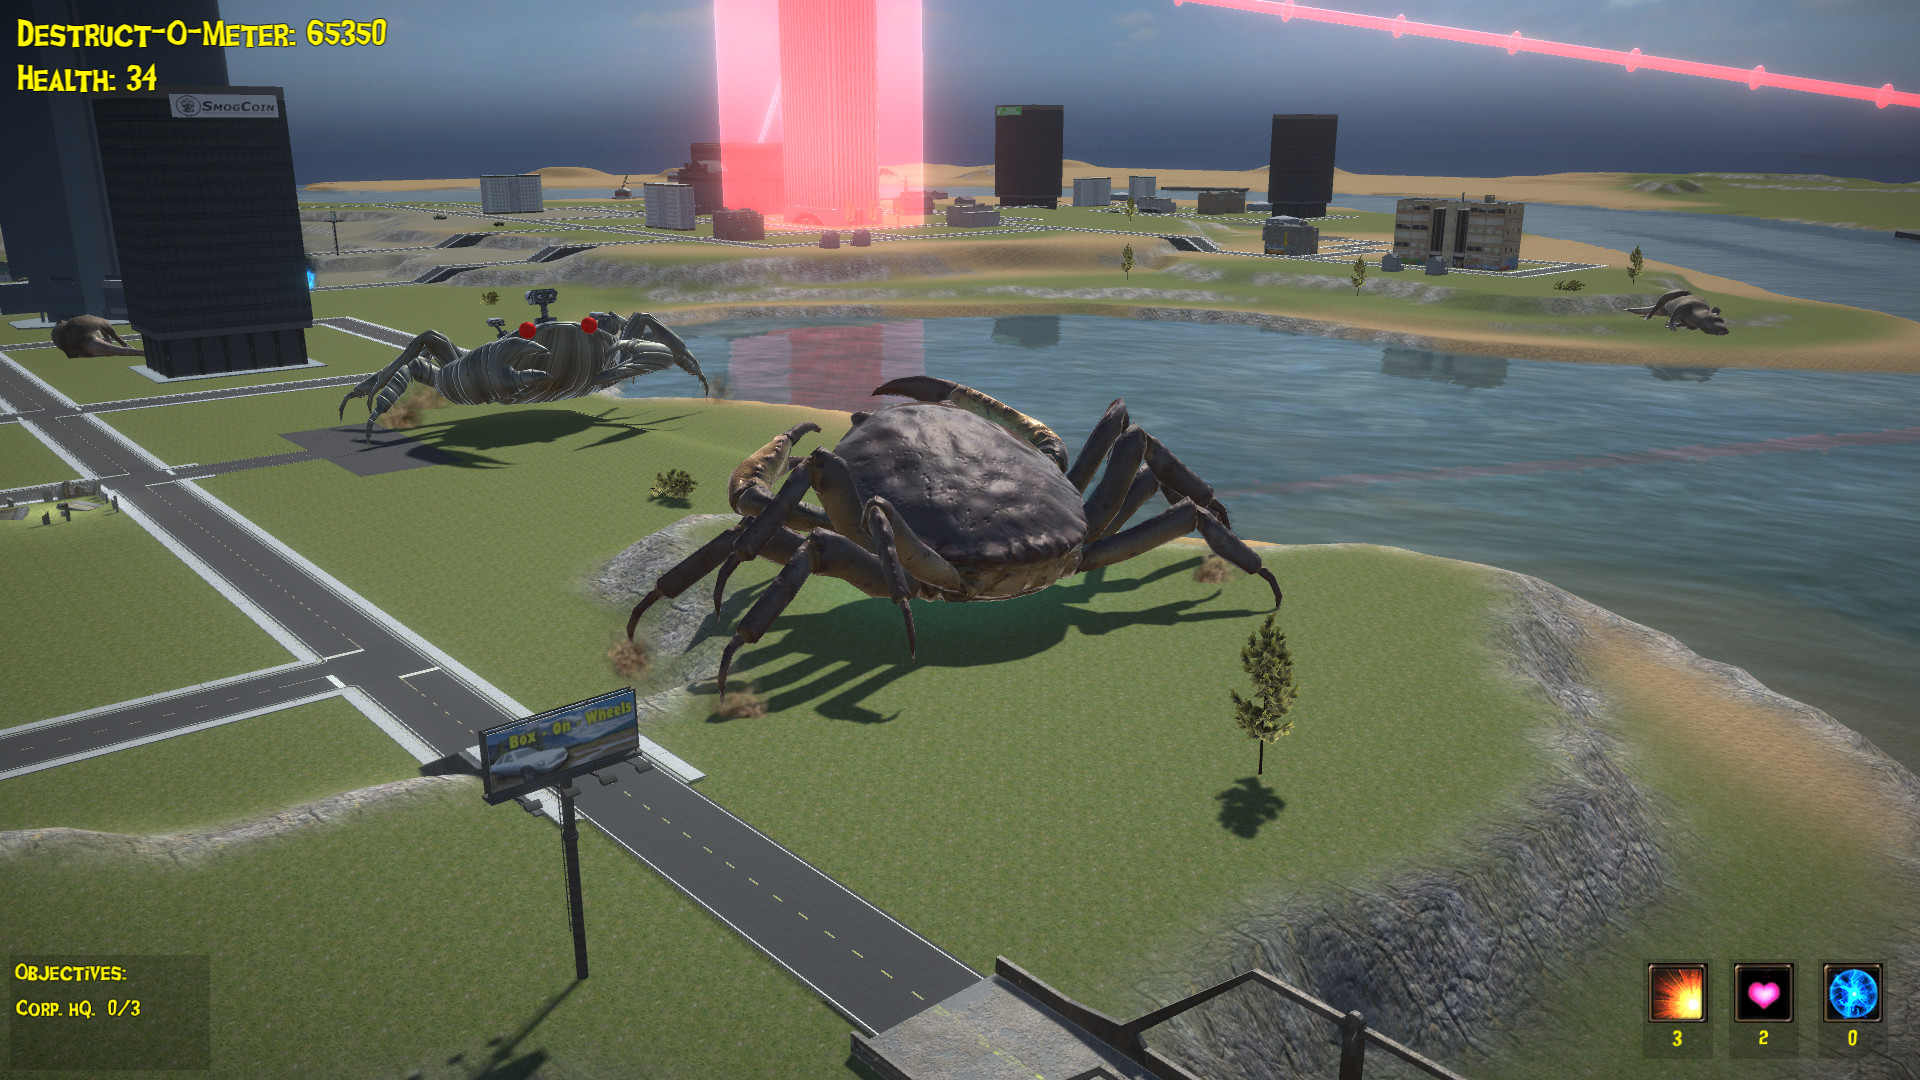 Steam：Attack of the Giant Crab